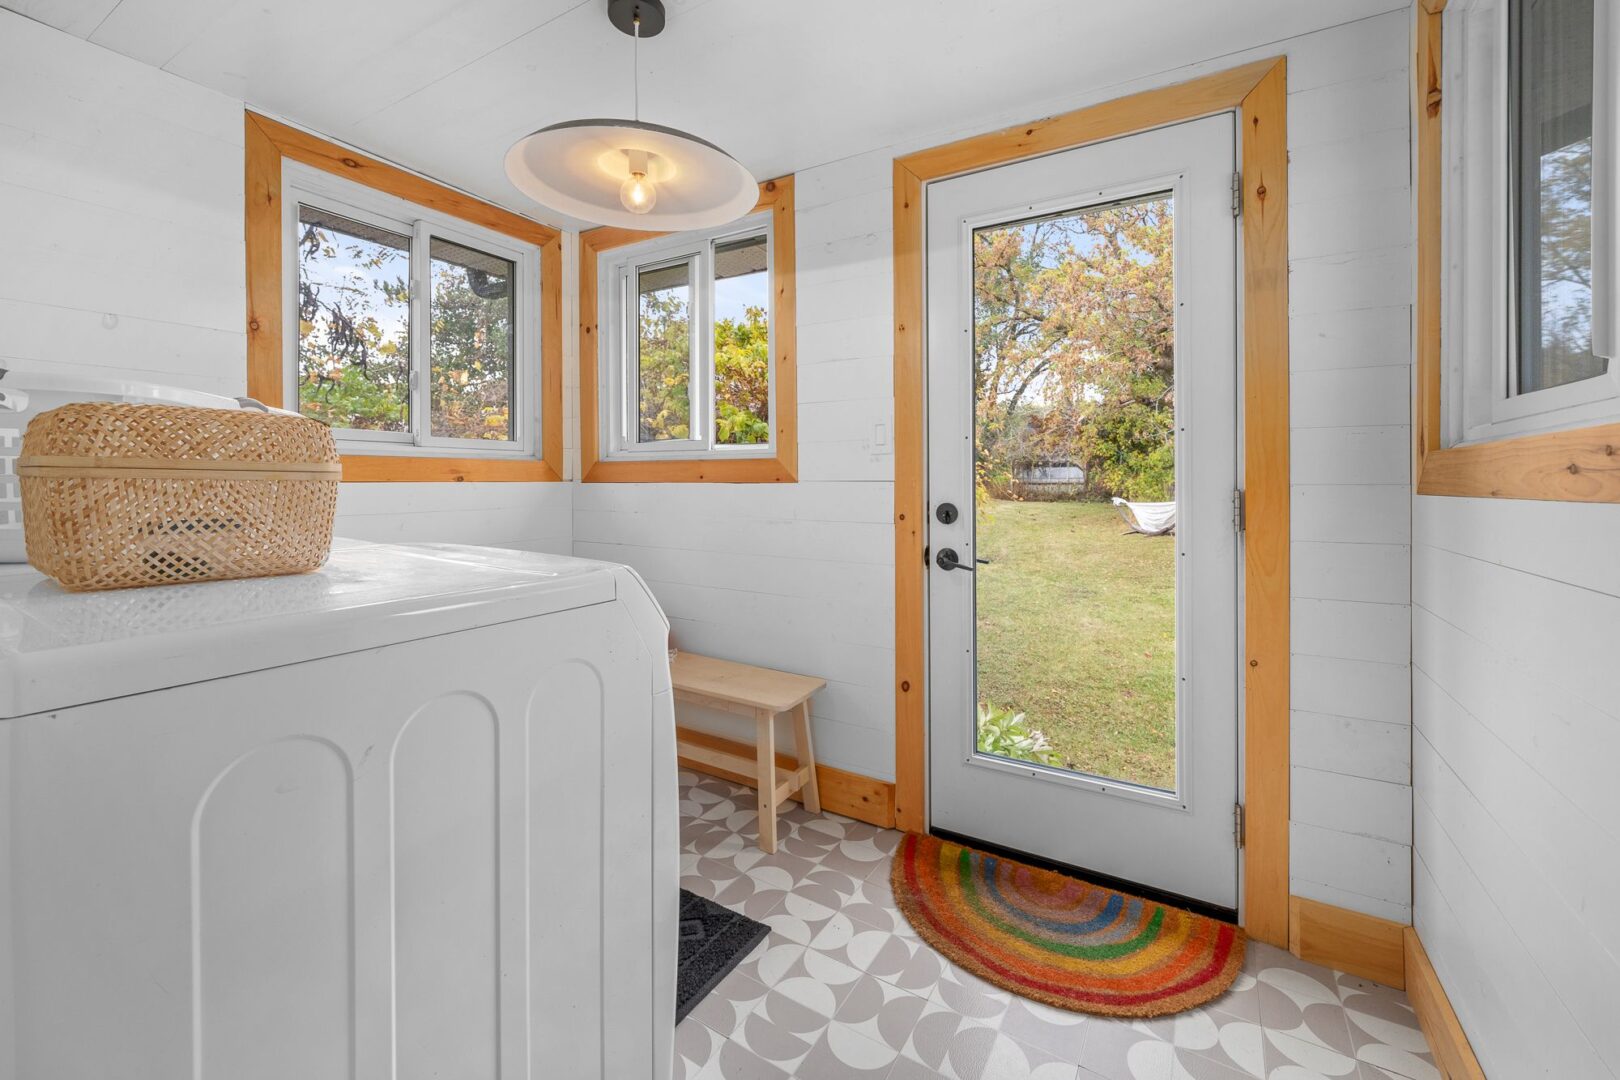 A small laundry area with a door leading to the backyard. A rainbow doormat sits in front of the door.